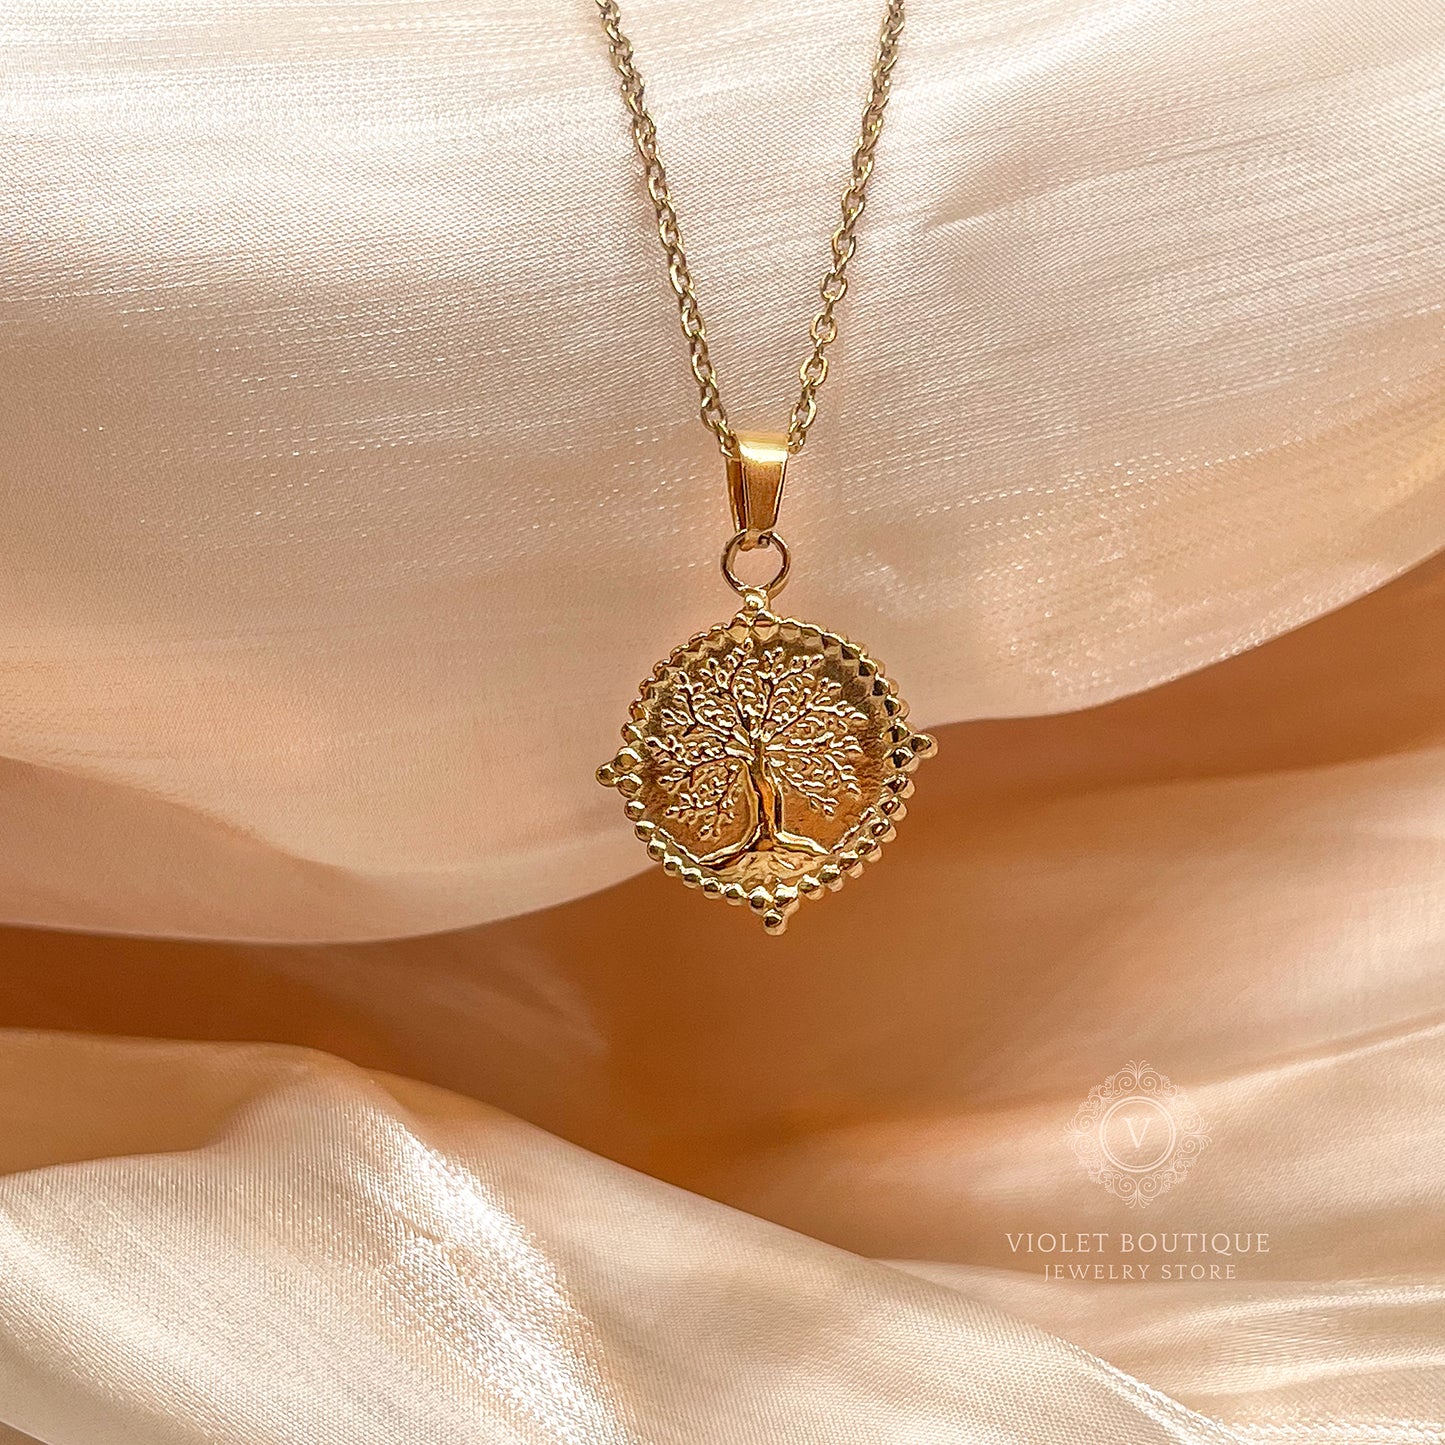 VB 18K Gold Plated Tree of Life Minimalistic Pendant Necklace.